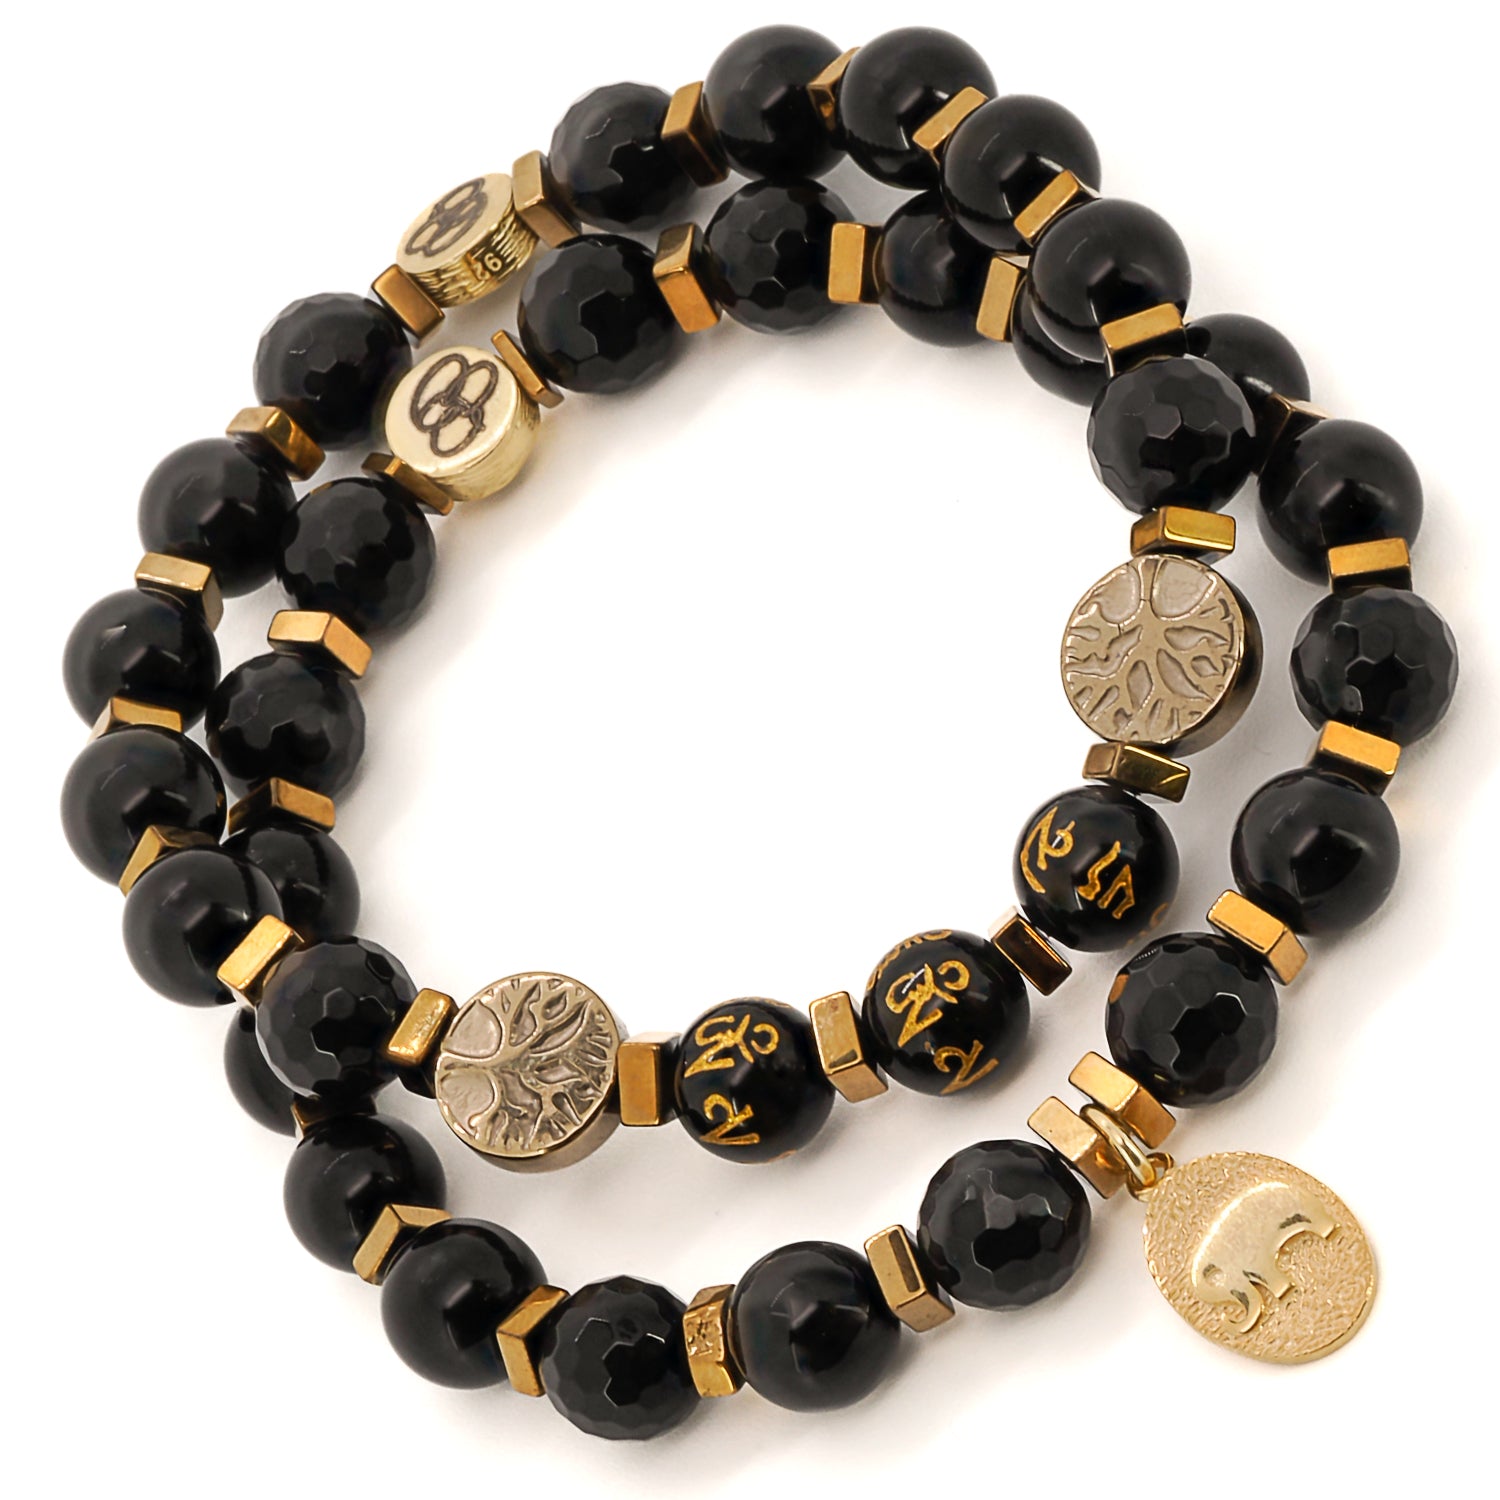 Radiate peace and calm with the Onyx Yoga Journey Bracelet Set, featuring Om Mani Padme Hum mantra beads and a Tree of Life charm.